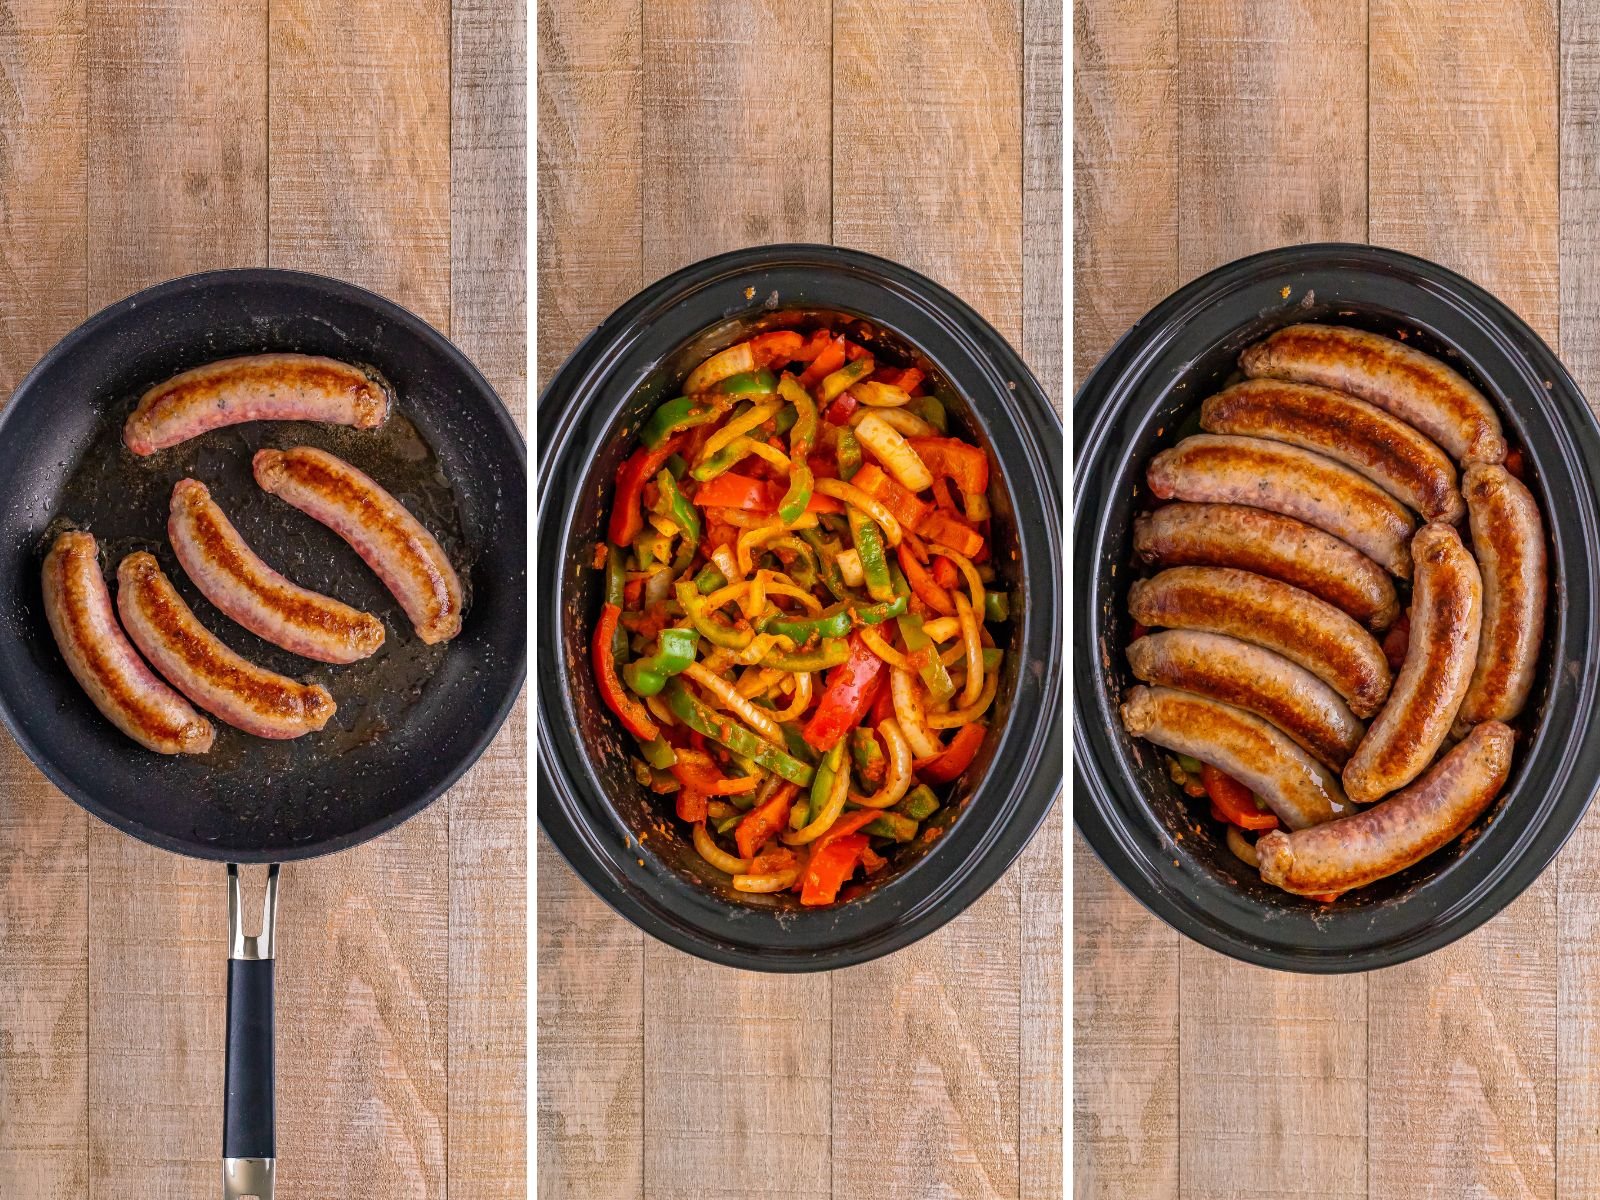 A skillet with cooked Itailian sausage, a Crockpot with cooked peppers and onions and one with sausages on top of the peppers and onions, 